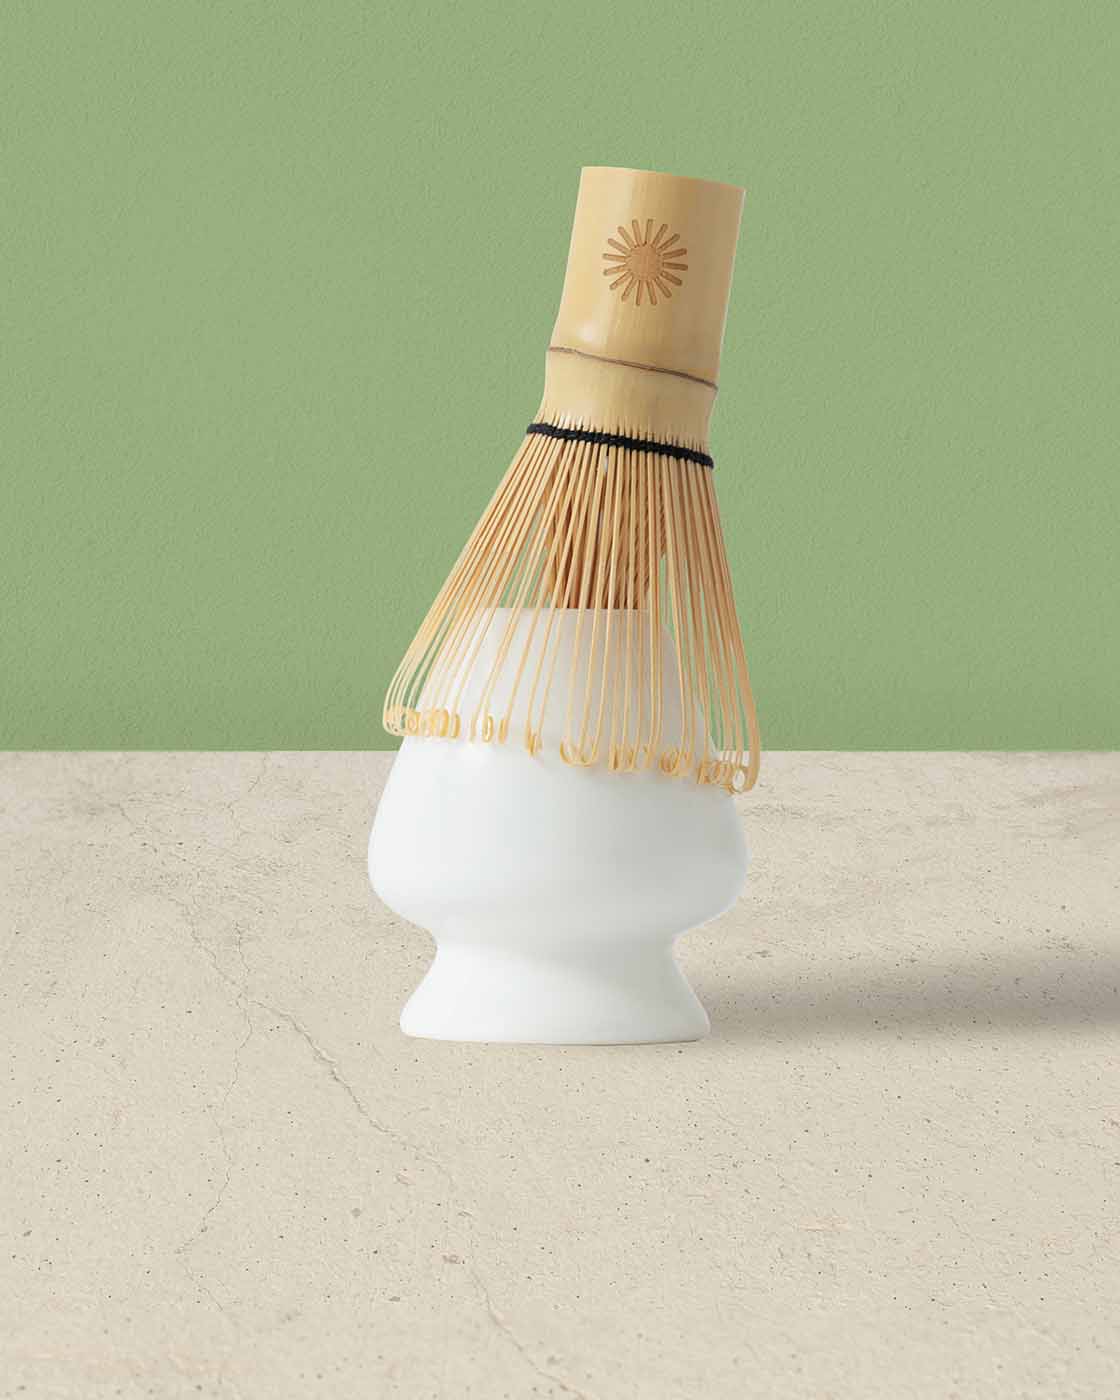 The Chasen Kusenaoshi Whisk Holder are the perfect accompaniment for your chasen bamboo whisk, sold at Matchakin